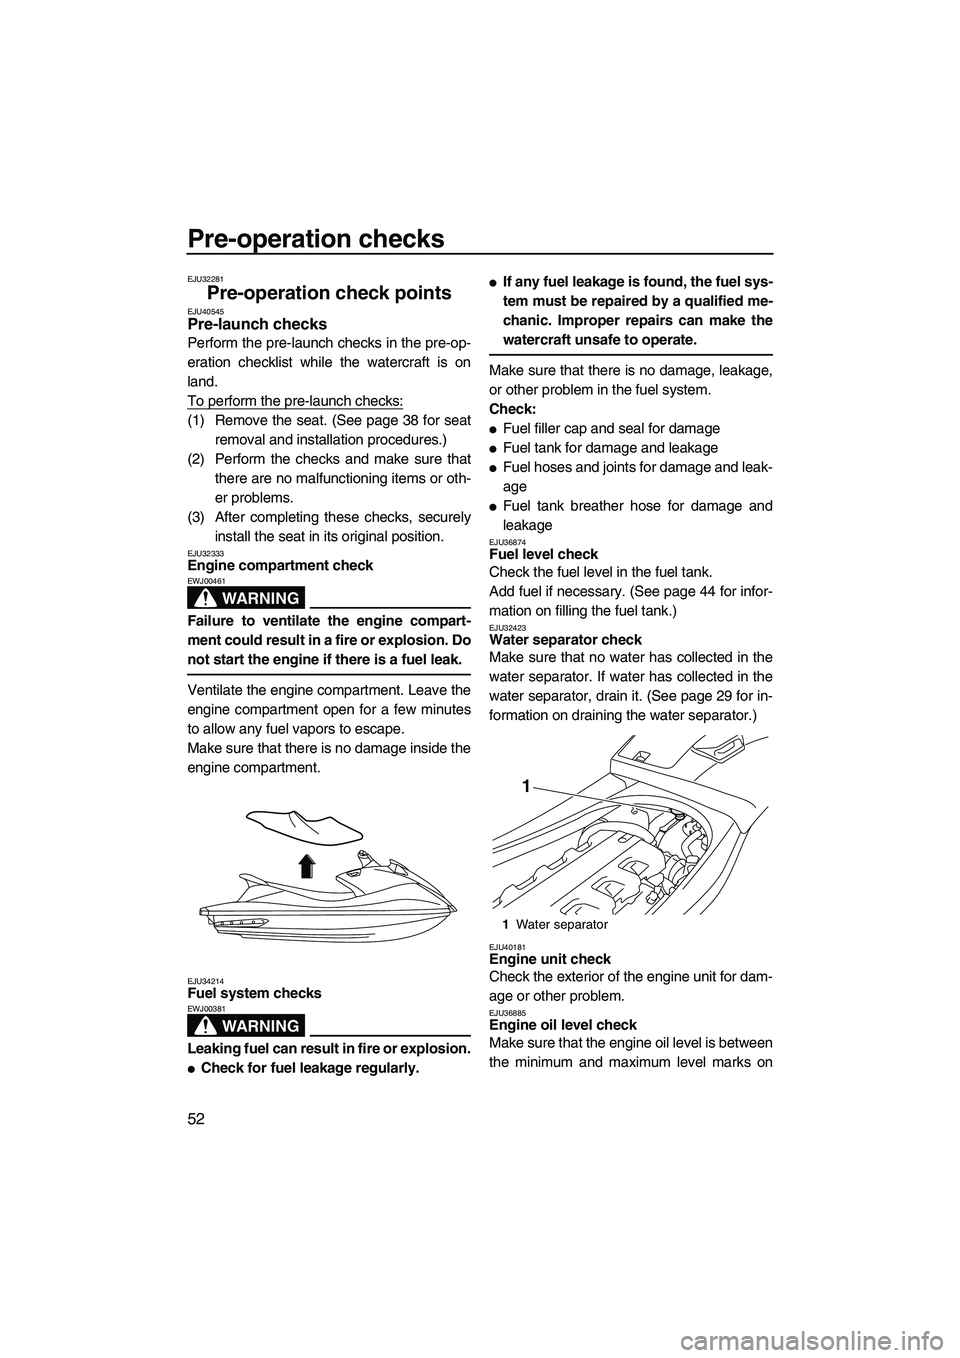 YAMAHA VXS 2012  Owners Manual Pre-operation checks
52
EJU32281
Pre-operation check points EJU40545Pre-launch checks 
Perform the pre-launch checks in the pre-op-
eration checklist while the watercraft is on
land.
To perform the pr